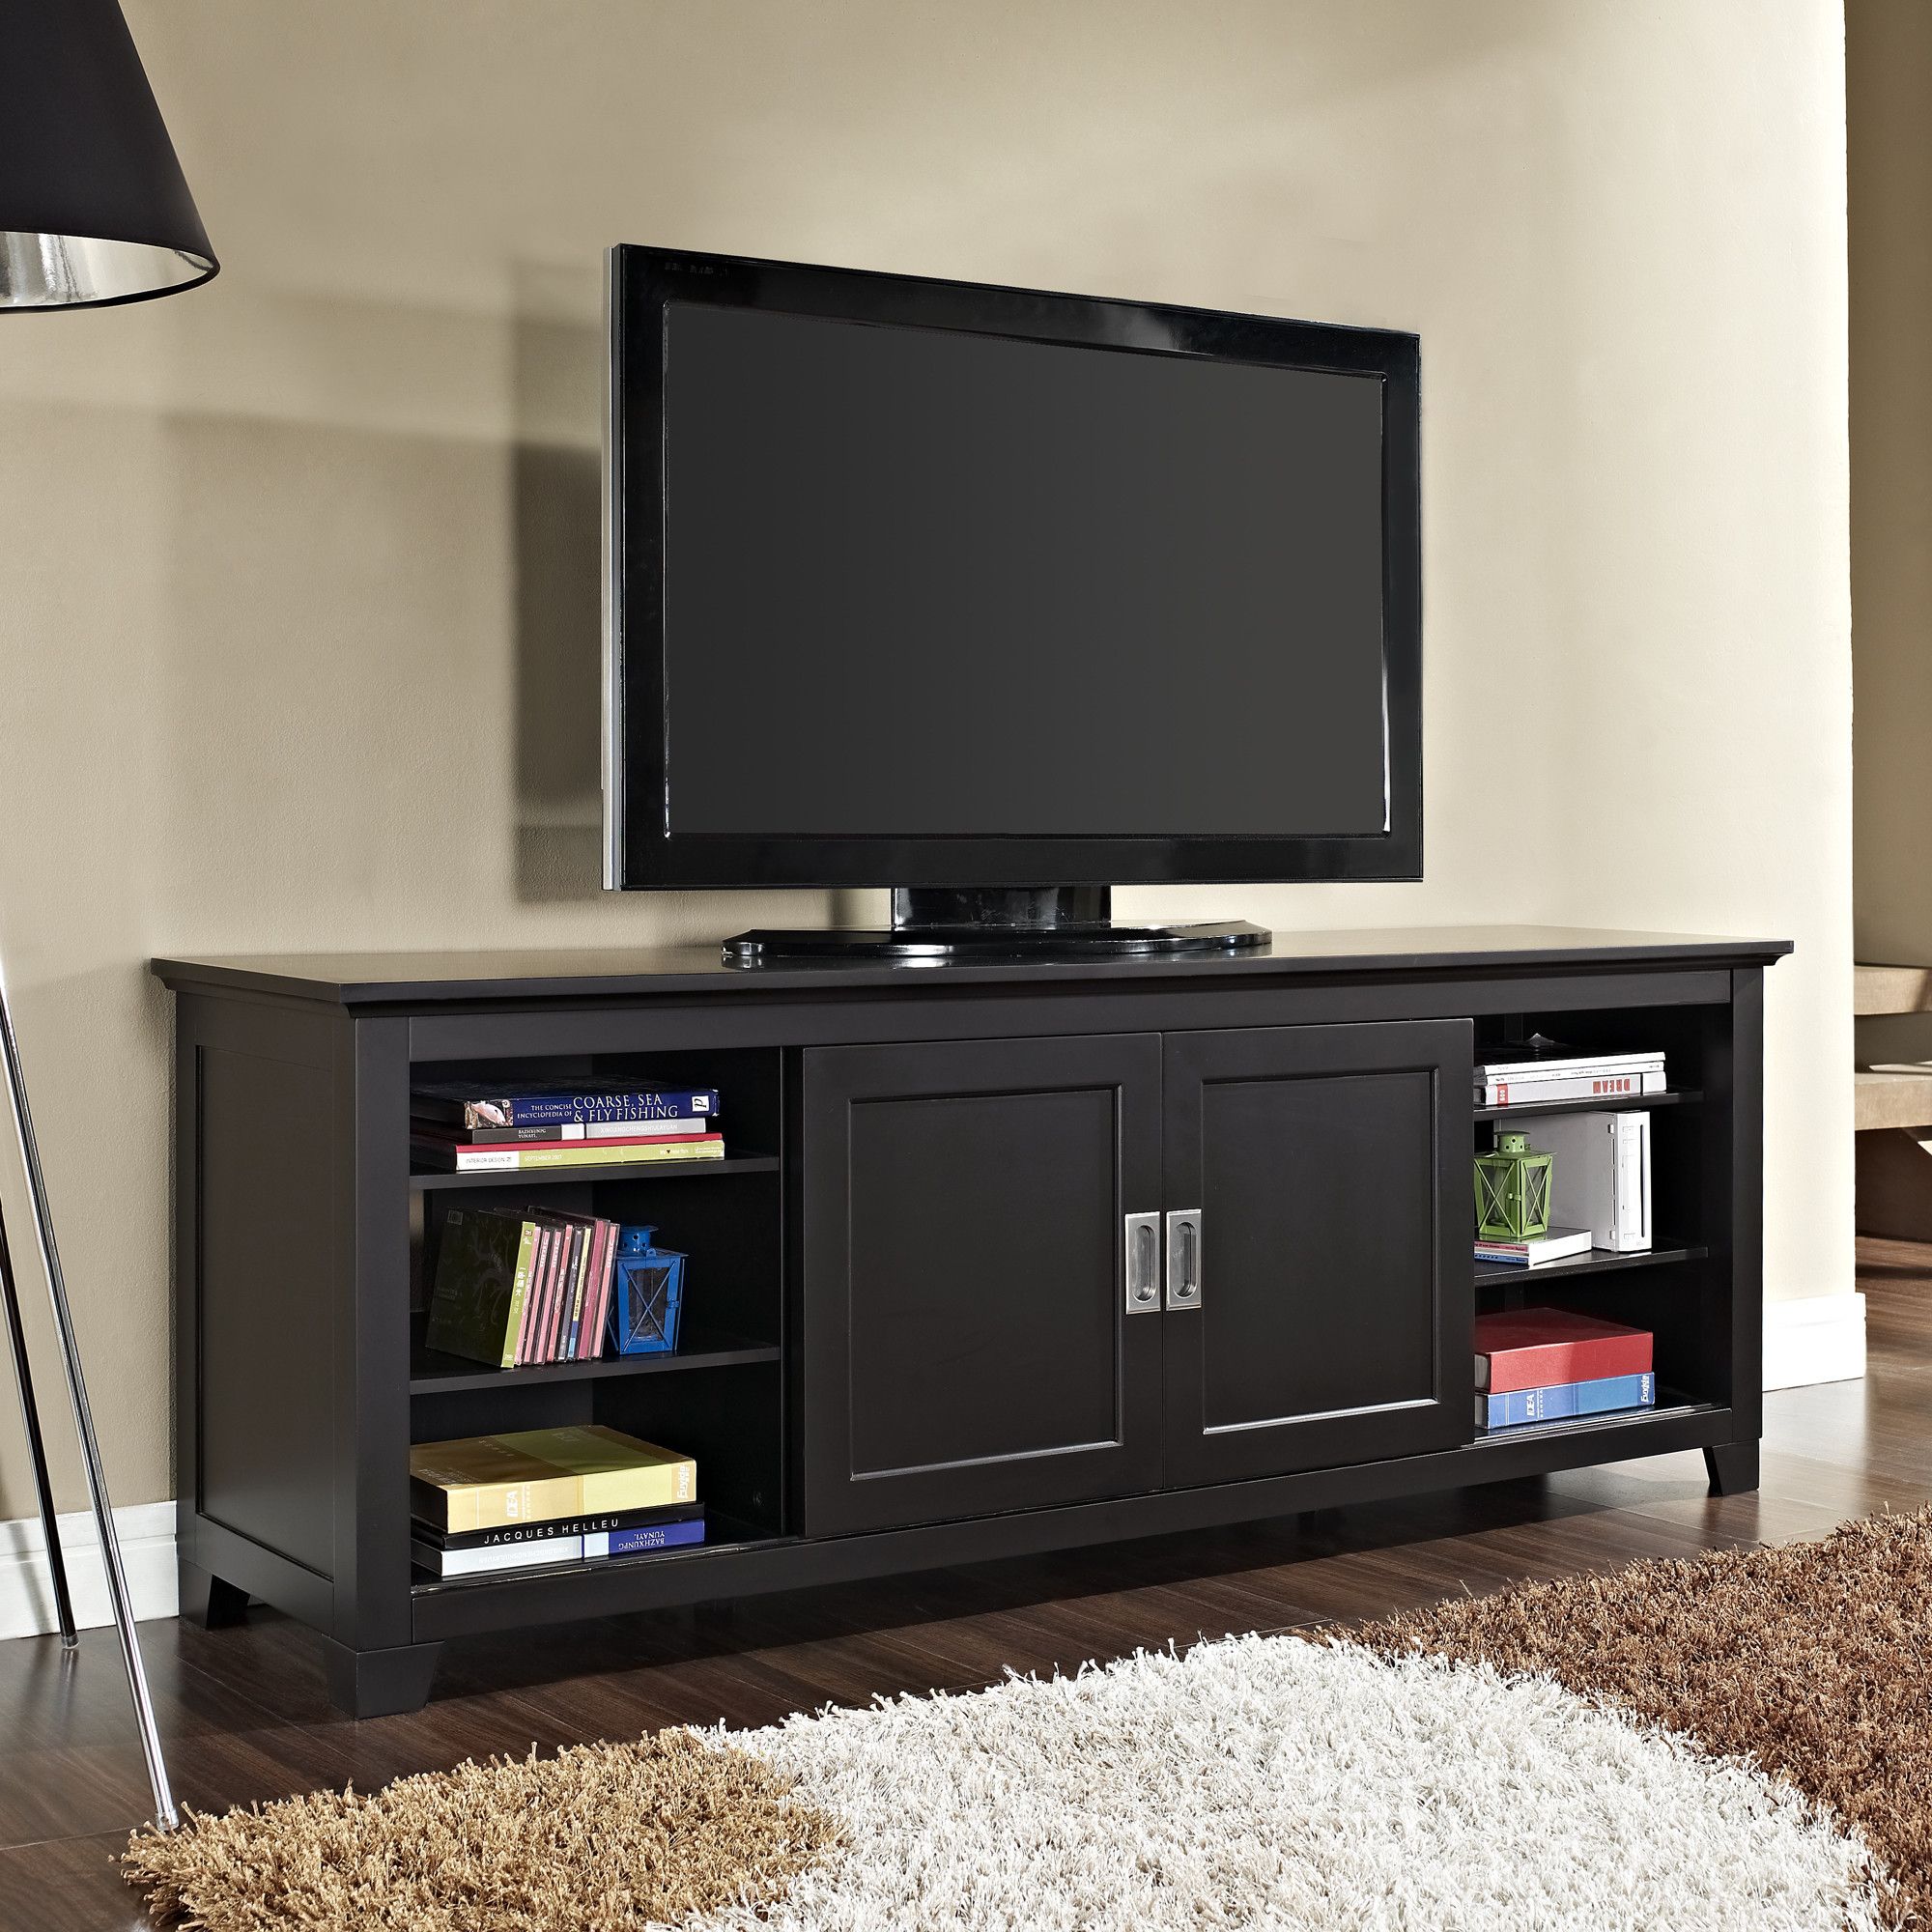 Wooden Sliding Tv Stand | Keko Furniture Pertaining To Wooden Tv Cabinets (View 2 of 15)